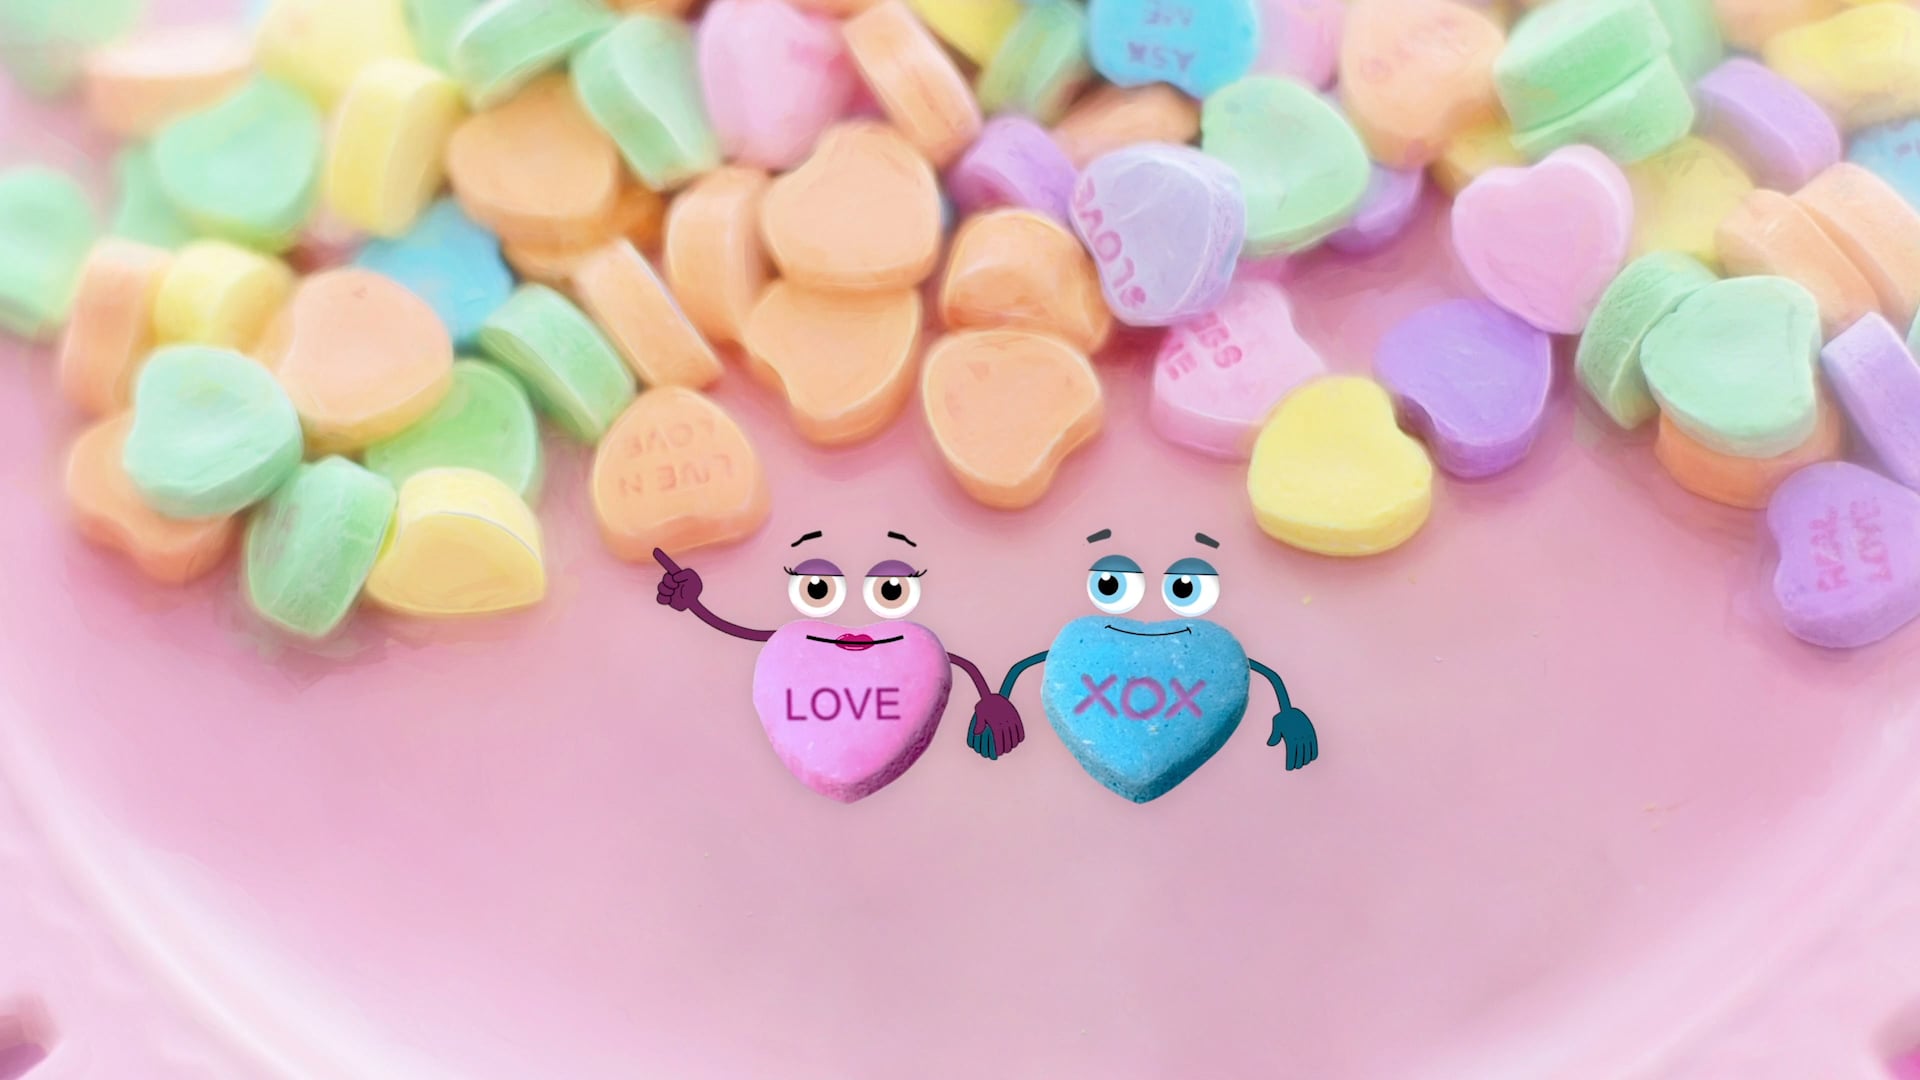 Valentine's Day Sweethearts:  What is love?